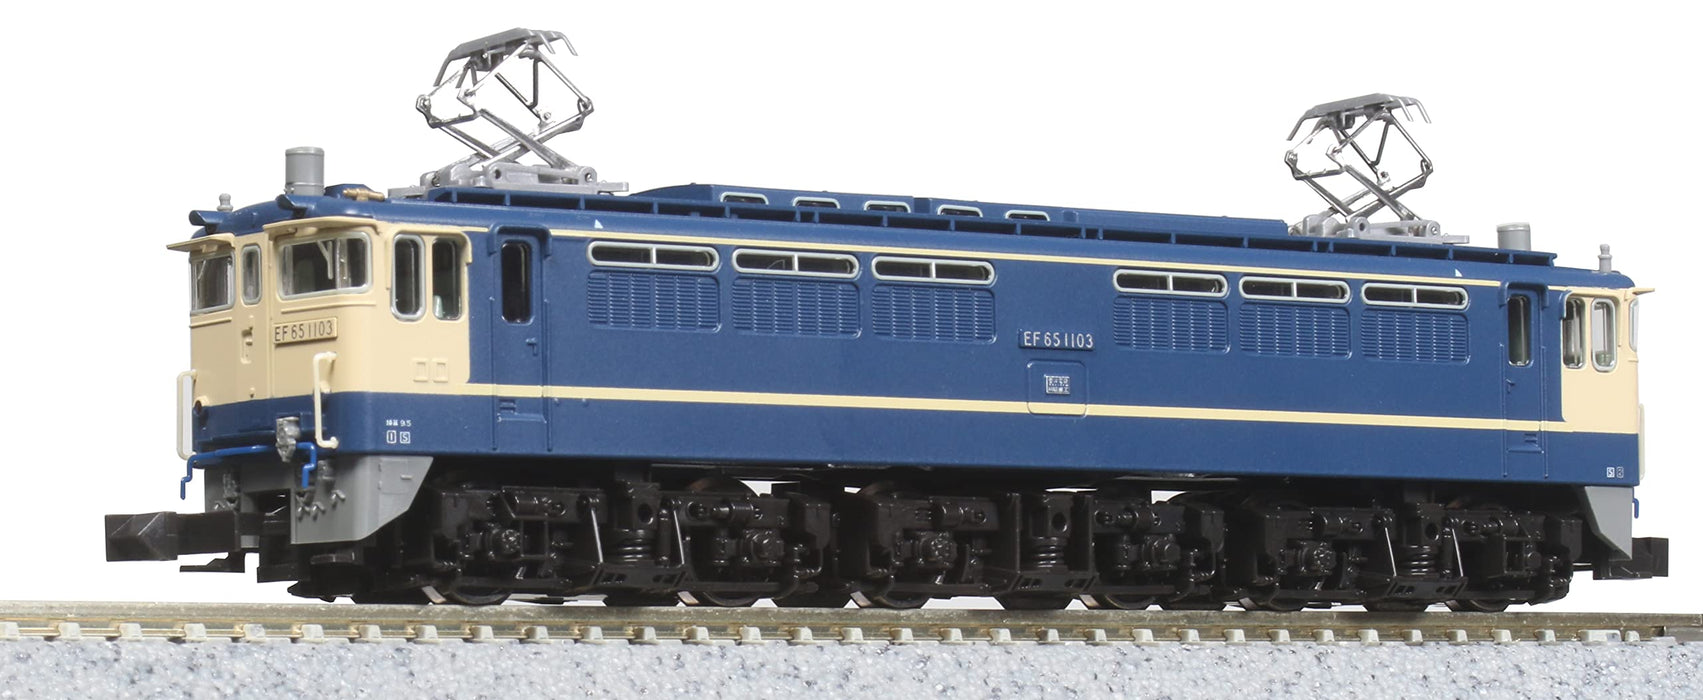 KATO 3061-1 Electric Locomotive Type Ef65-1000 Late Type N Scale